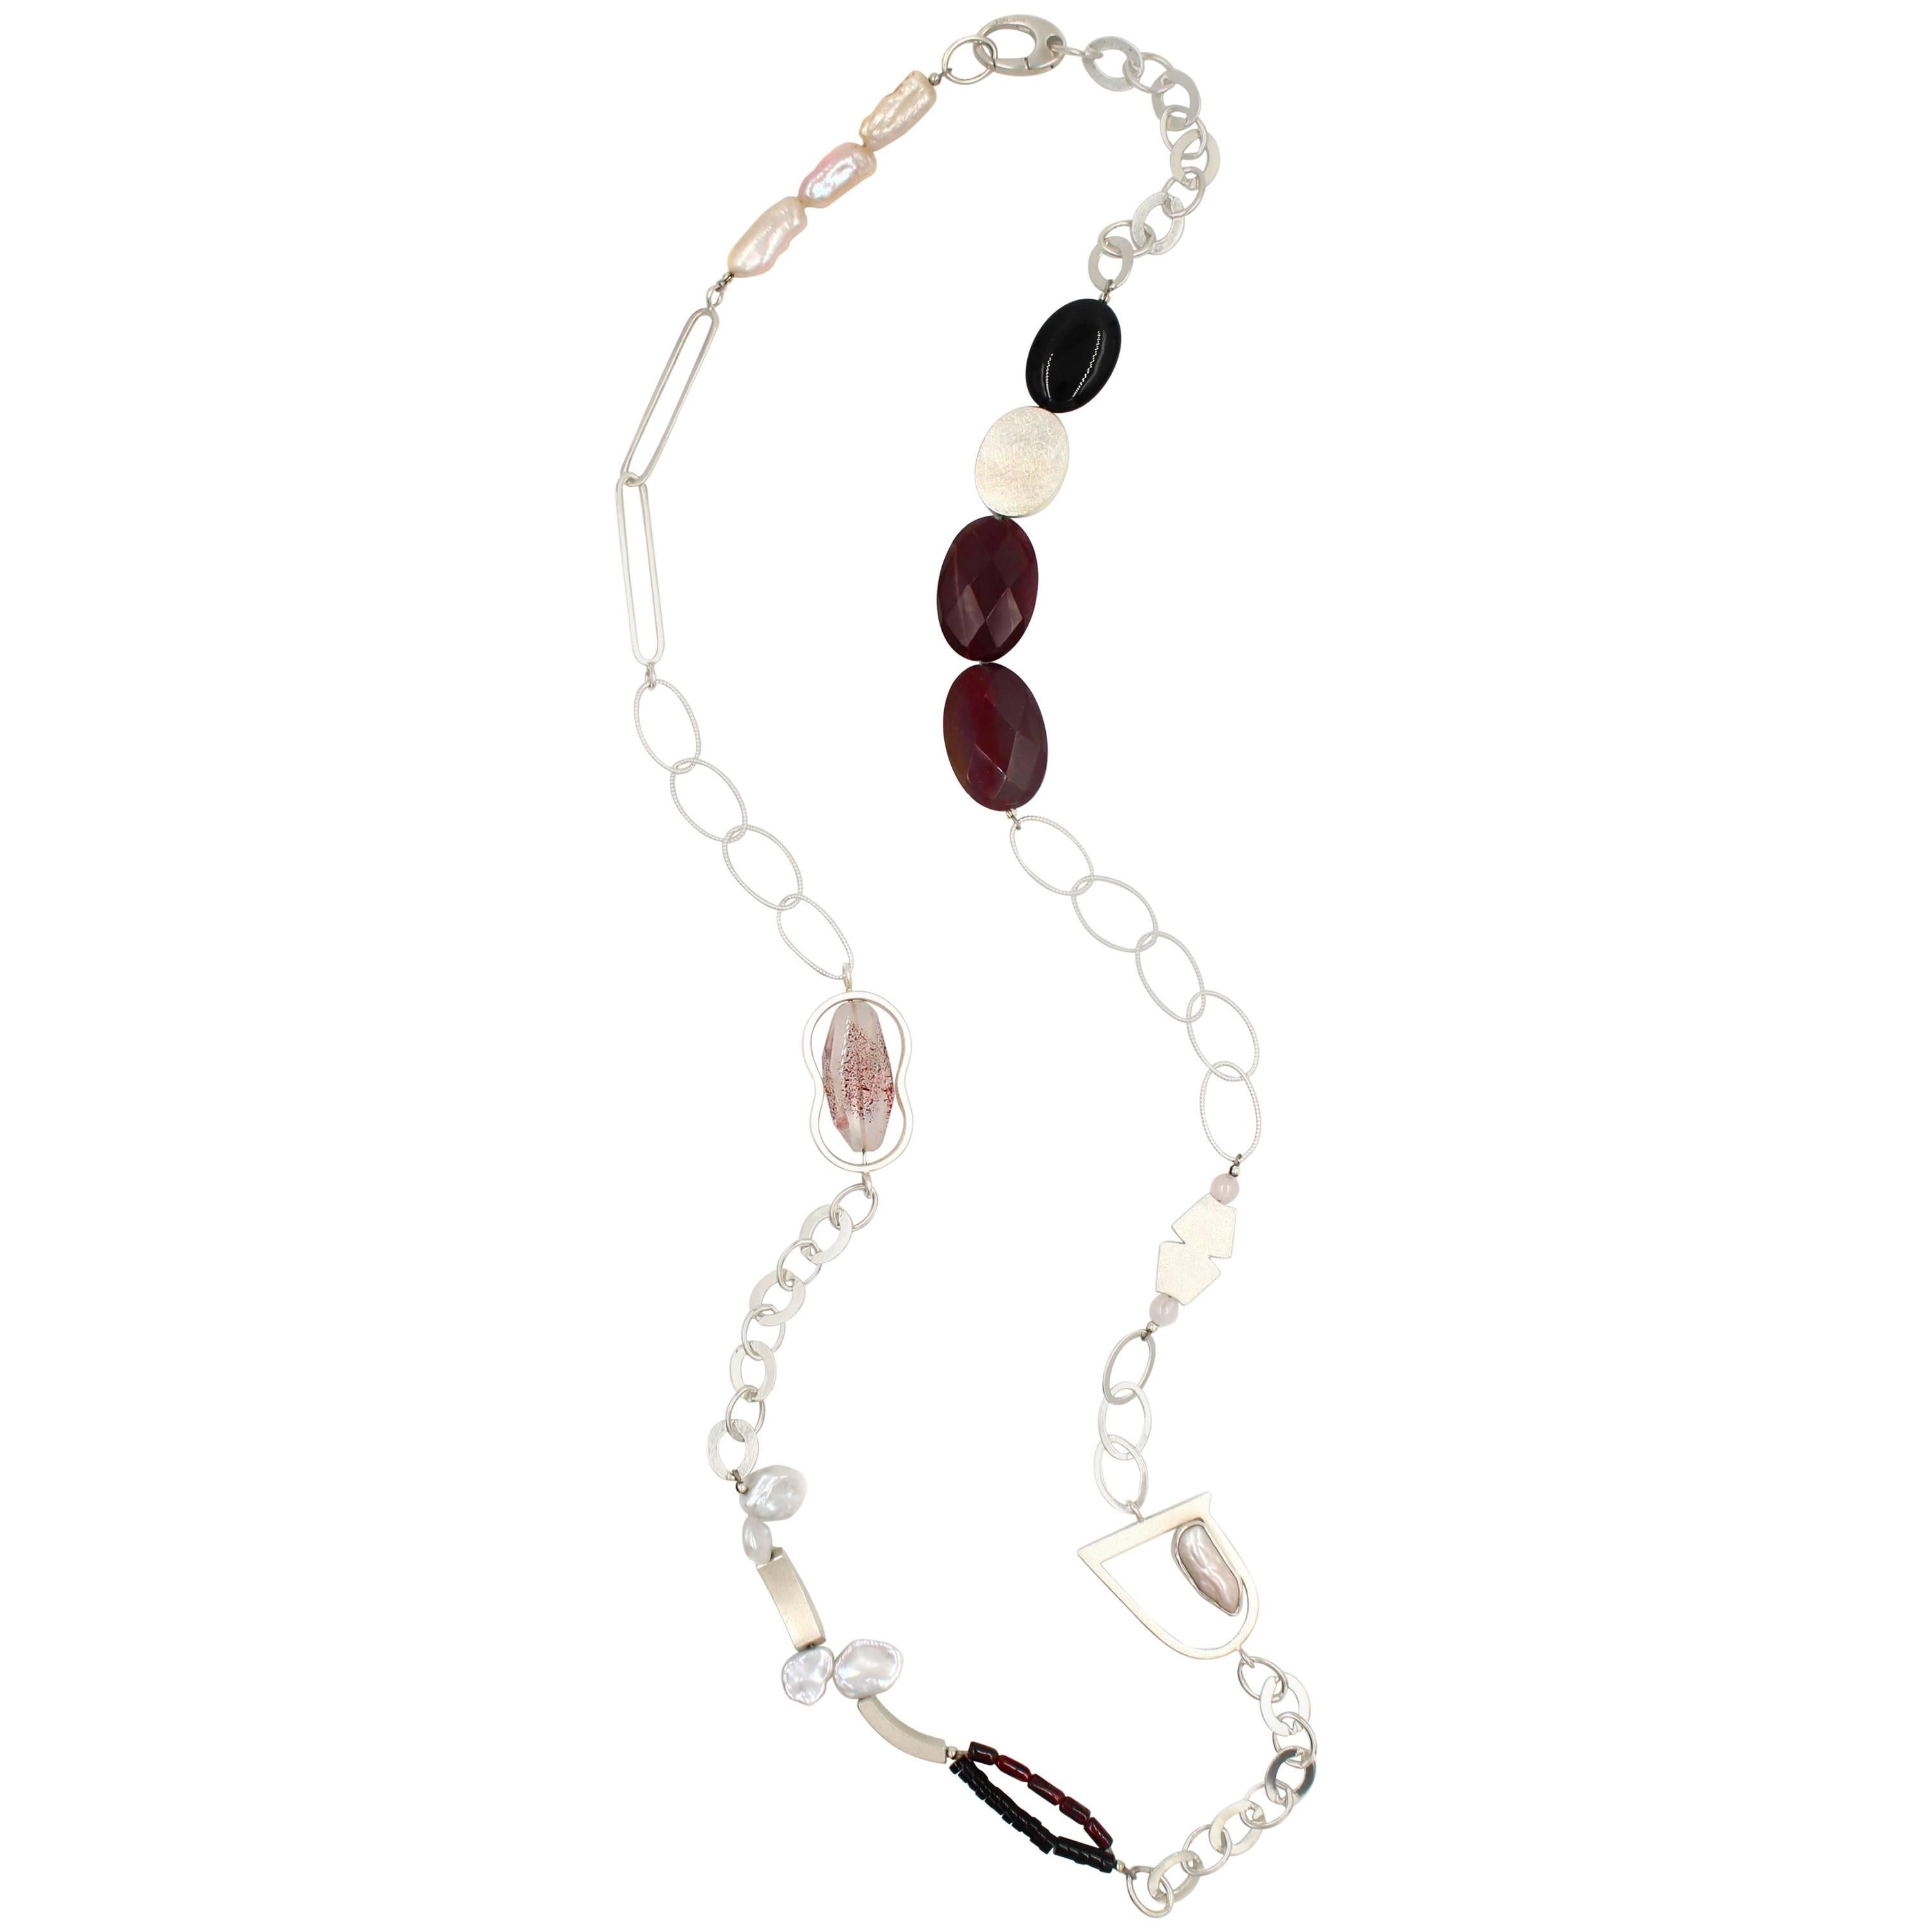 Cranberry Garnet and Sterling Silver Necklace